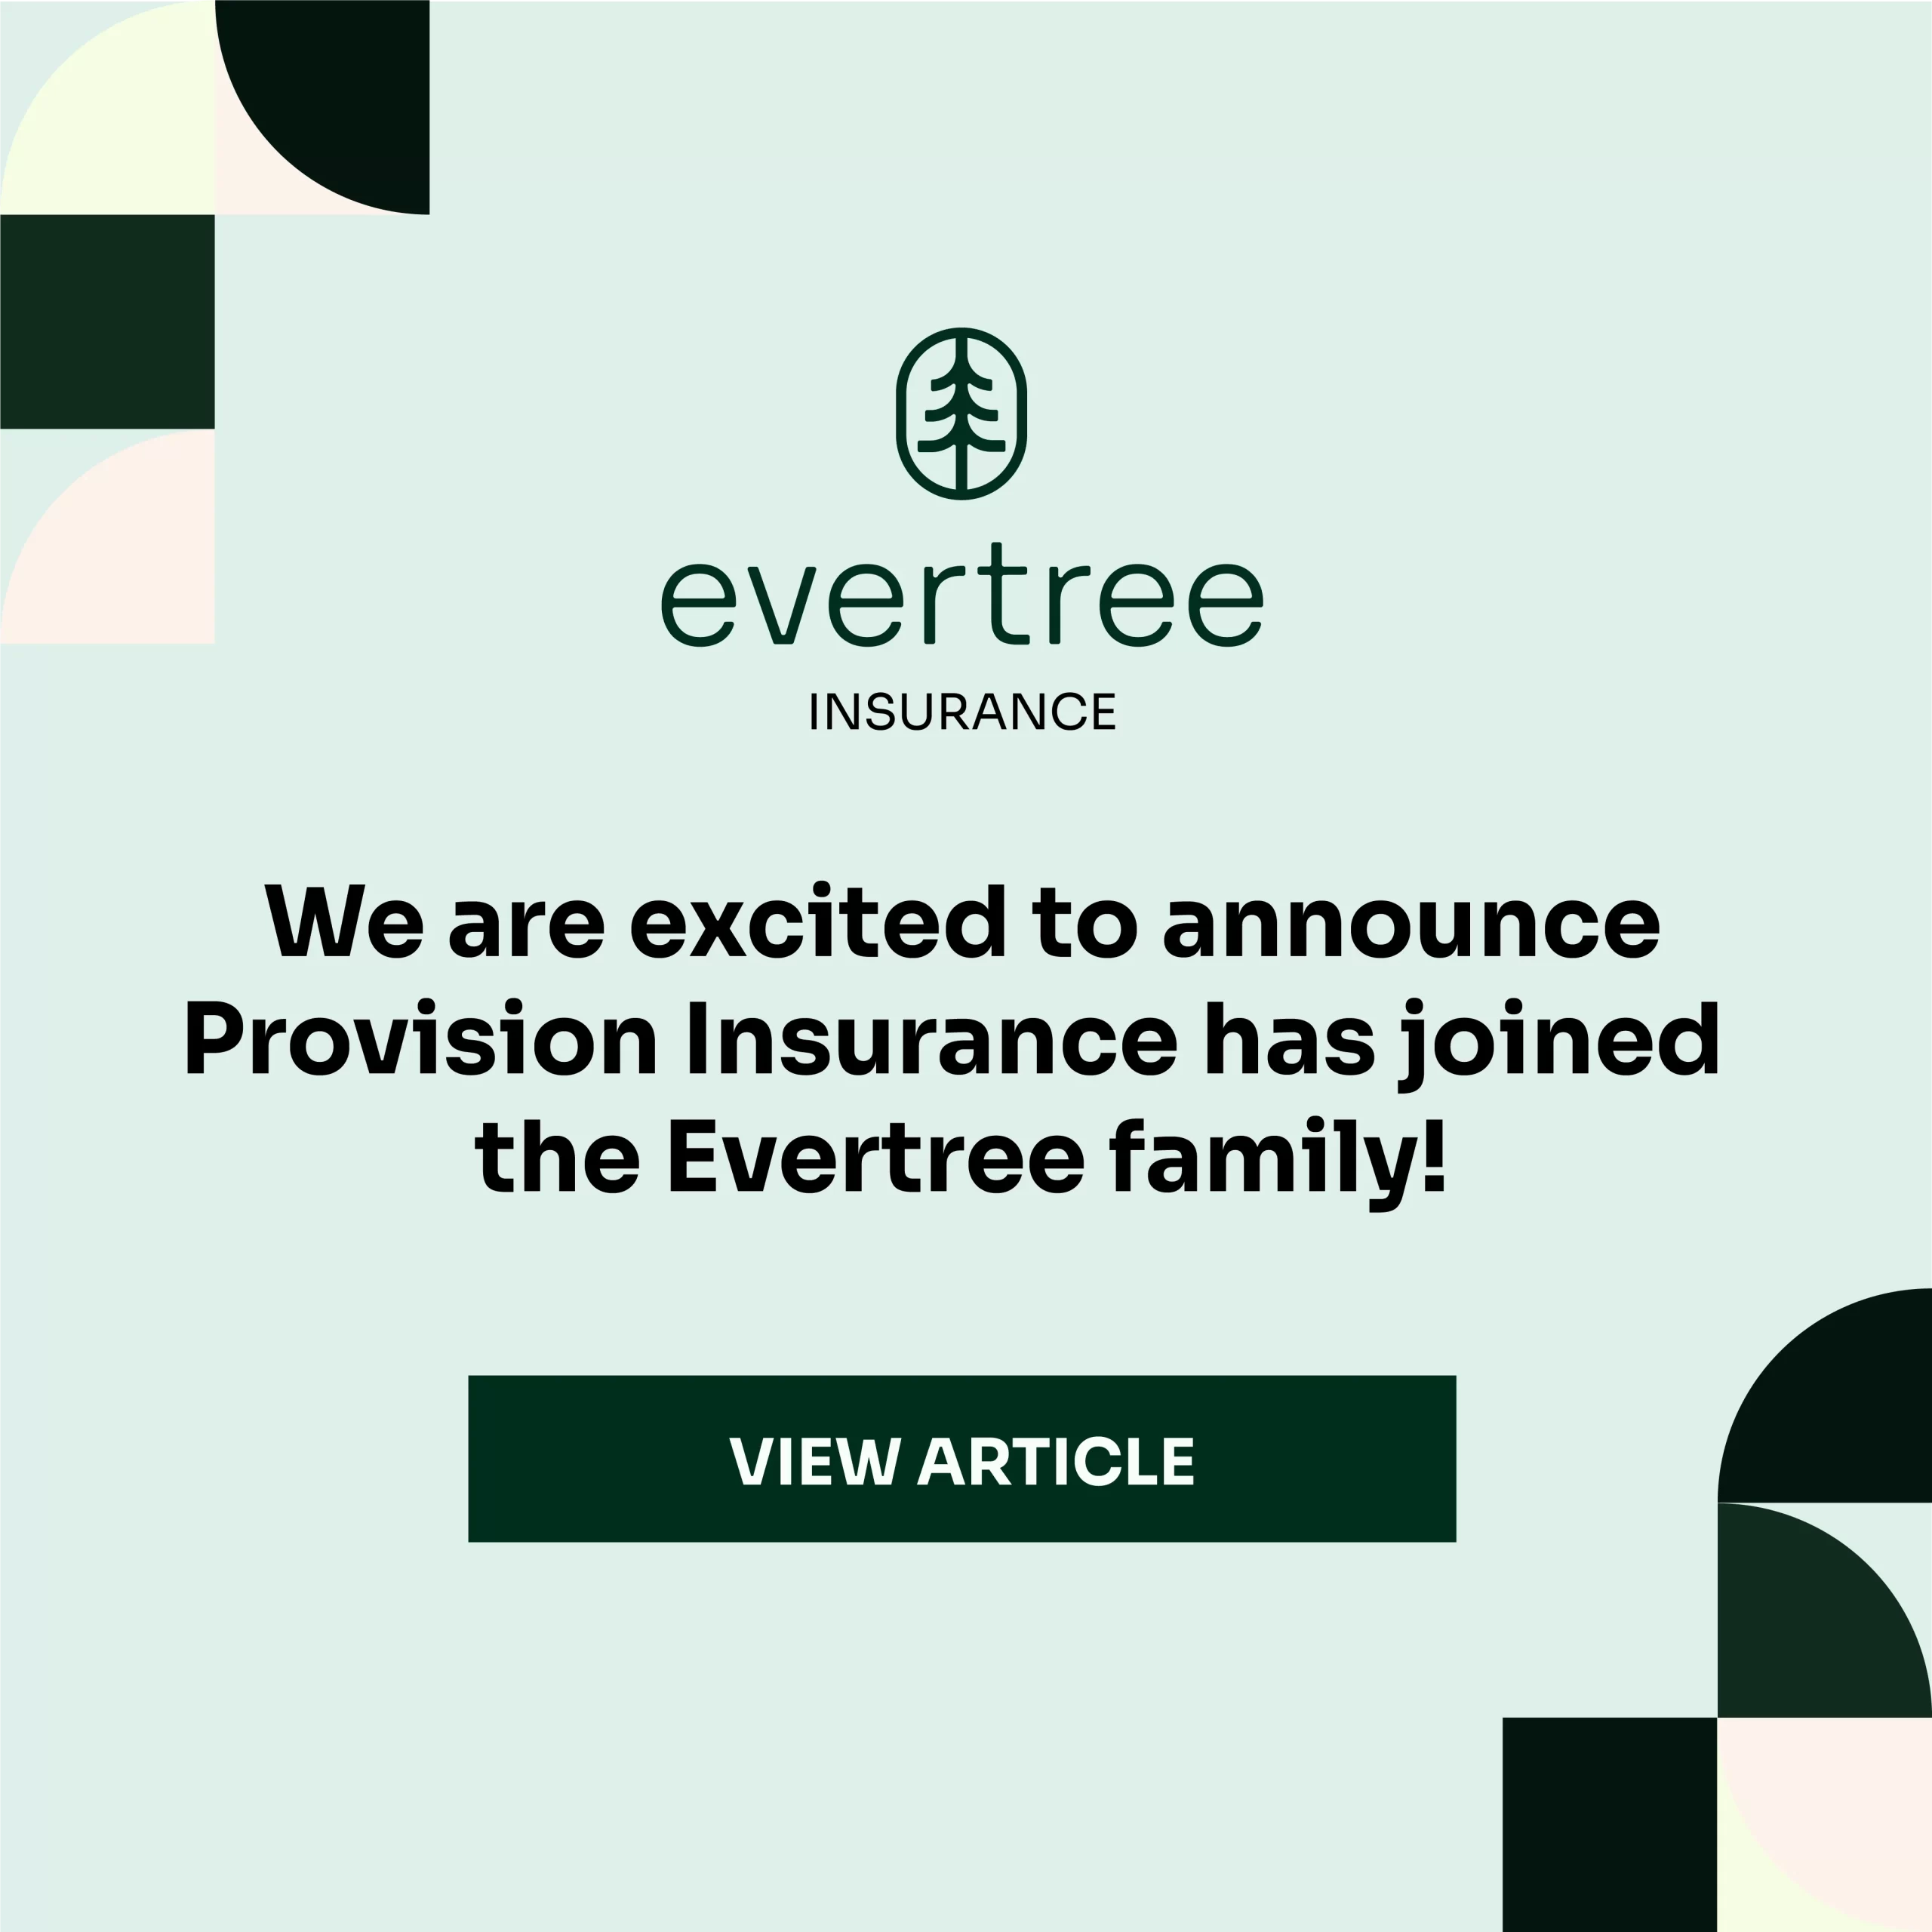 Evertree and Provision Insurance have joined.